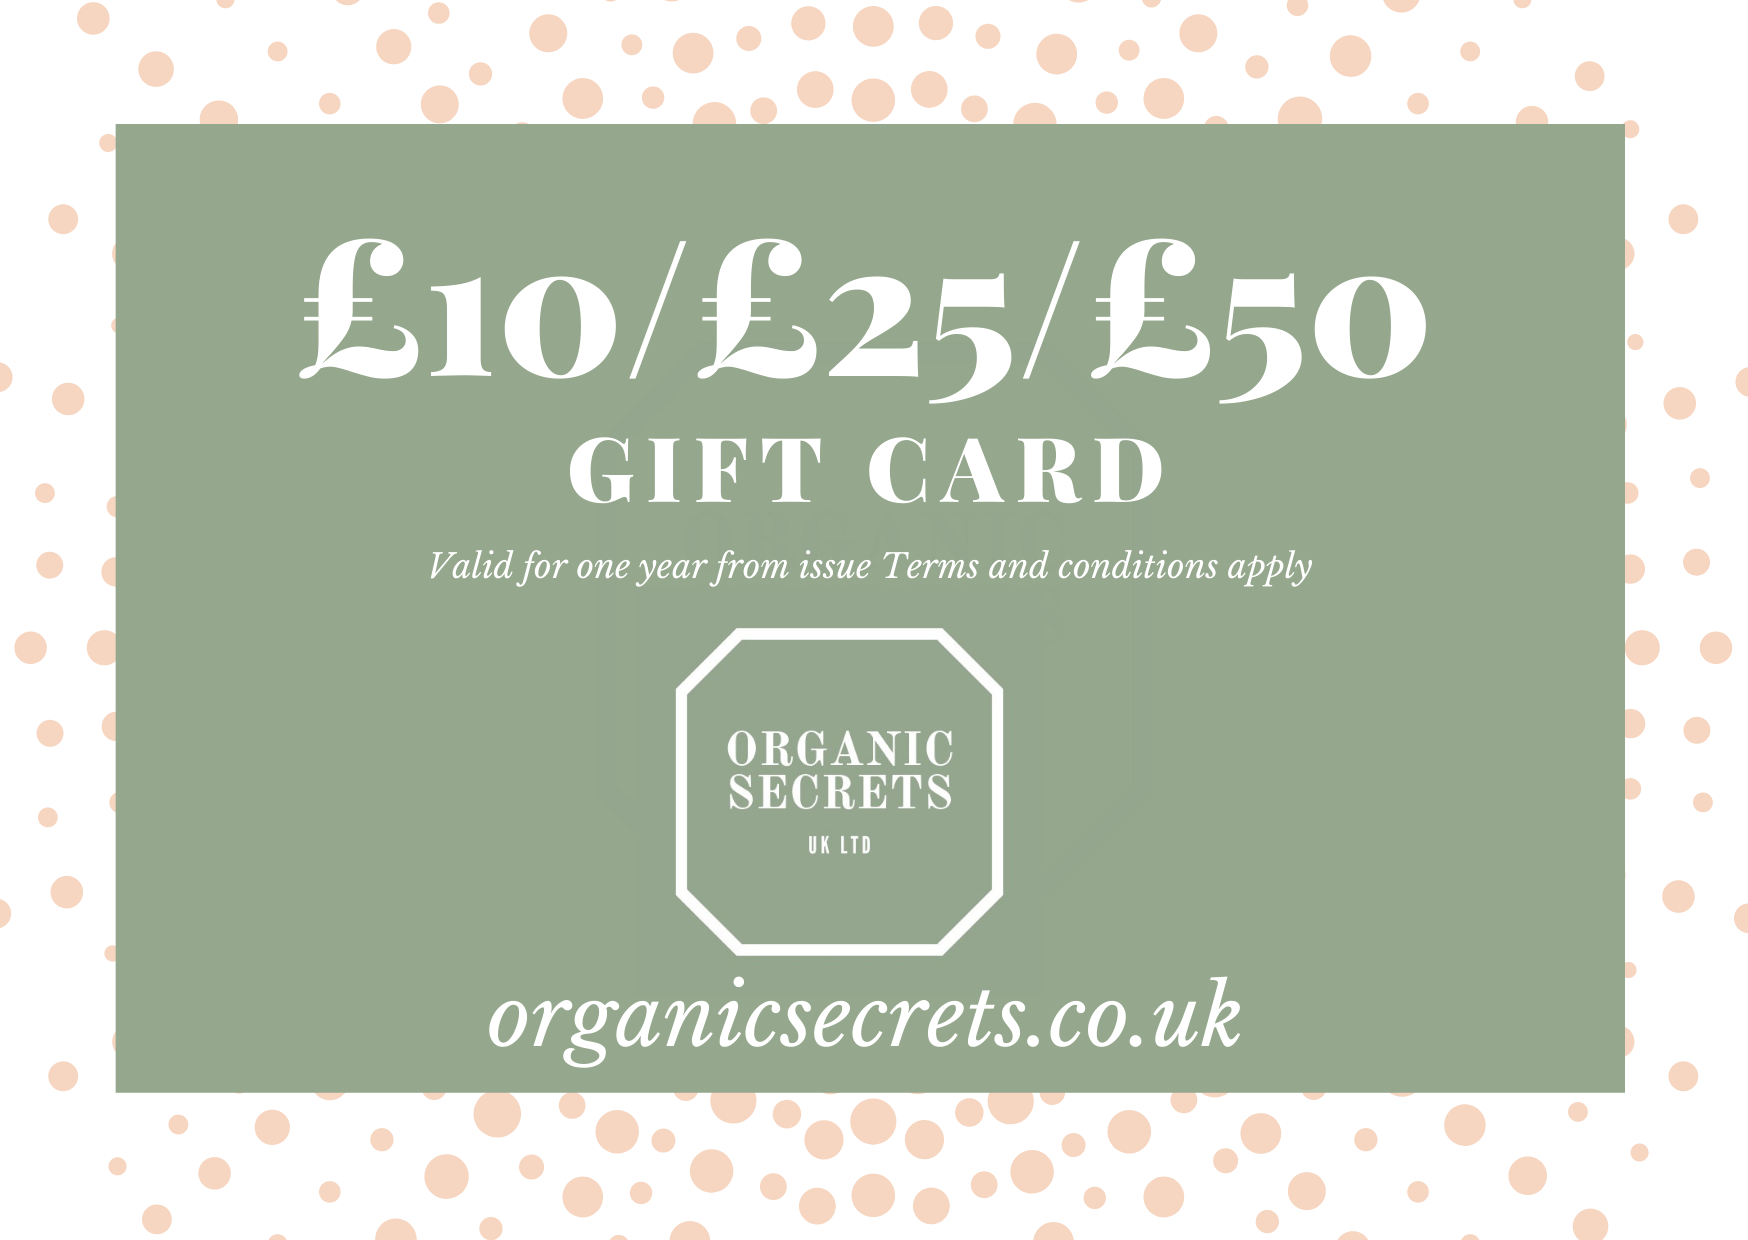 Organic Secrets CBD Digital Gift Card sent directly to yours or the intended recipient's email address.  